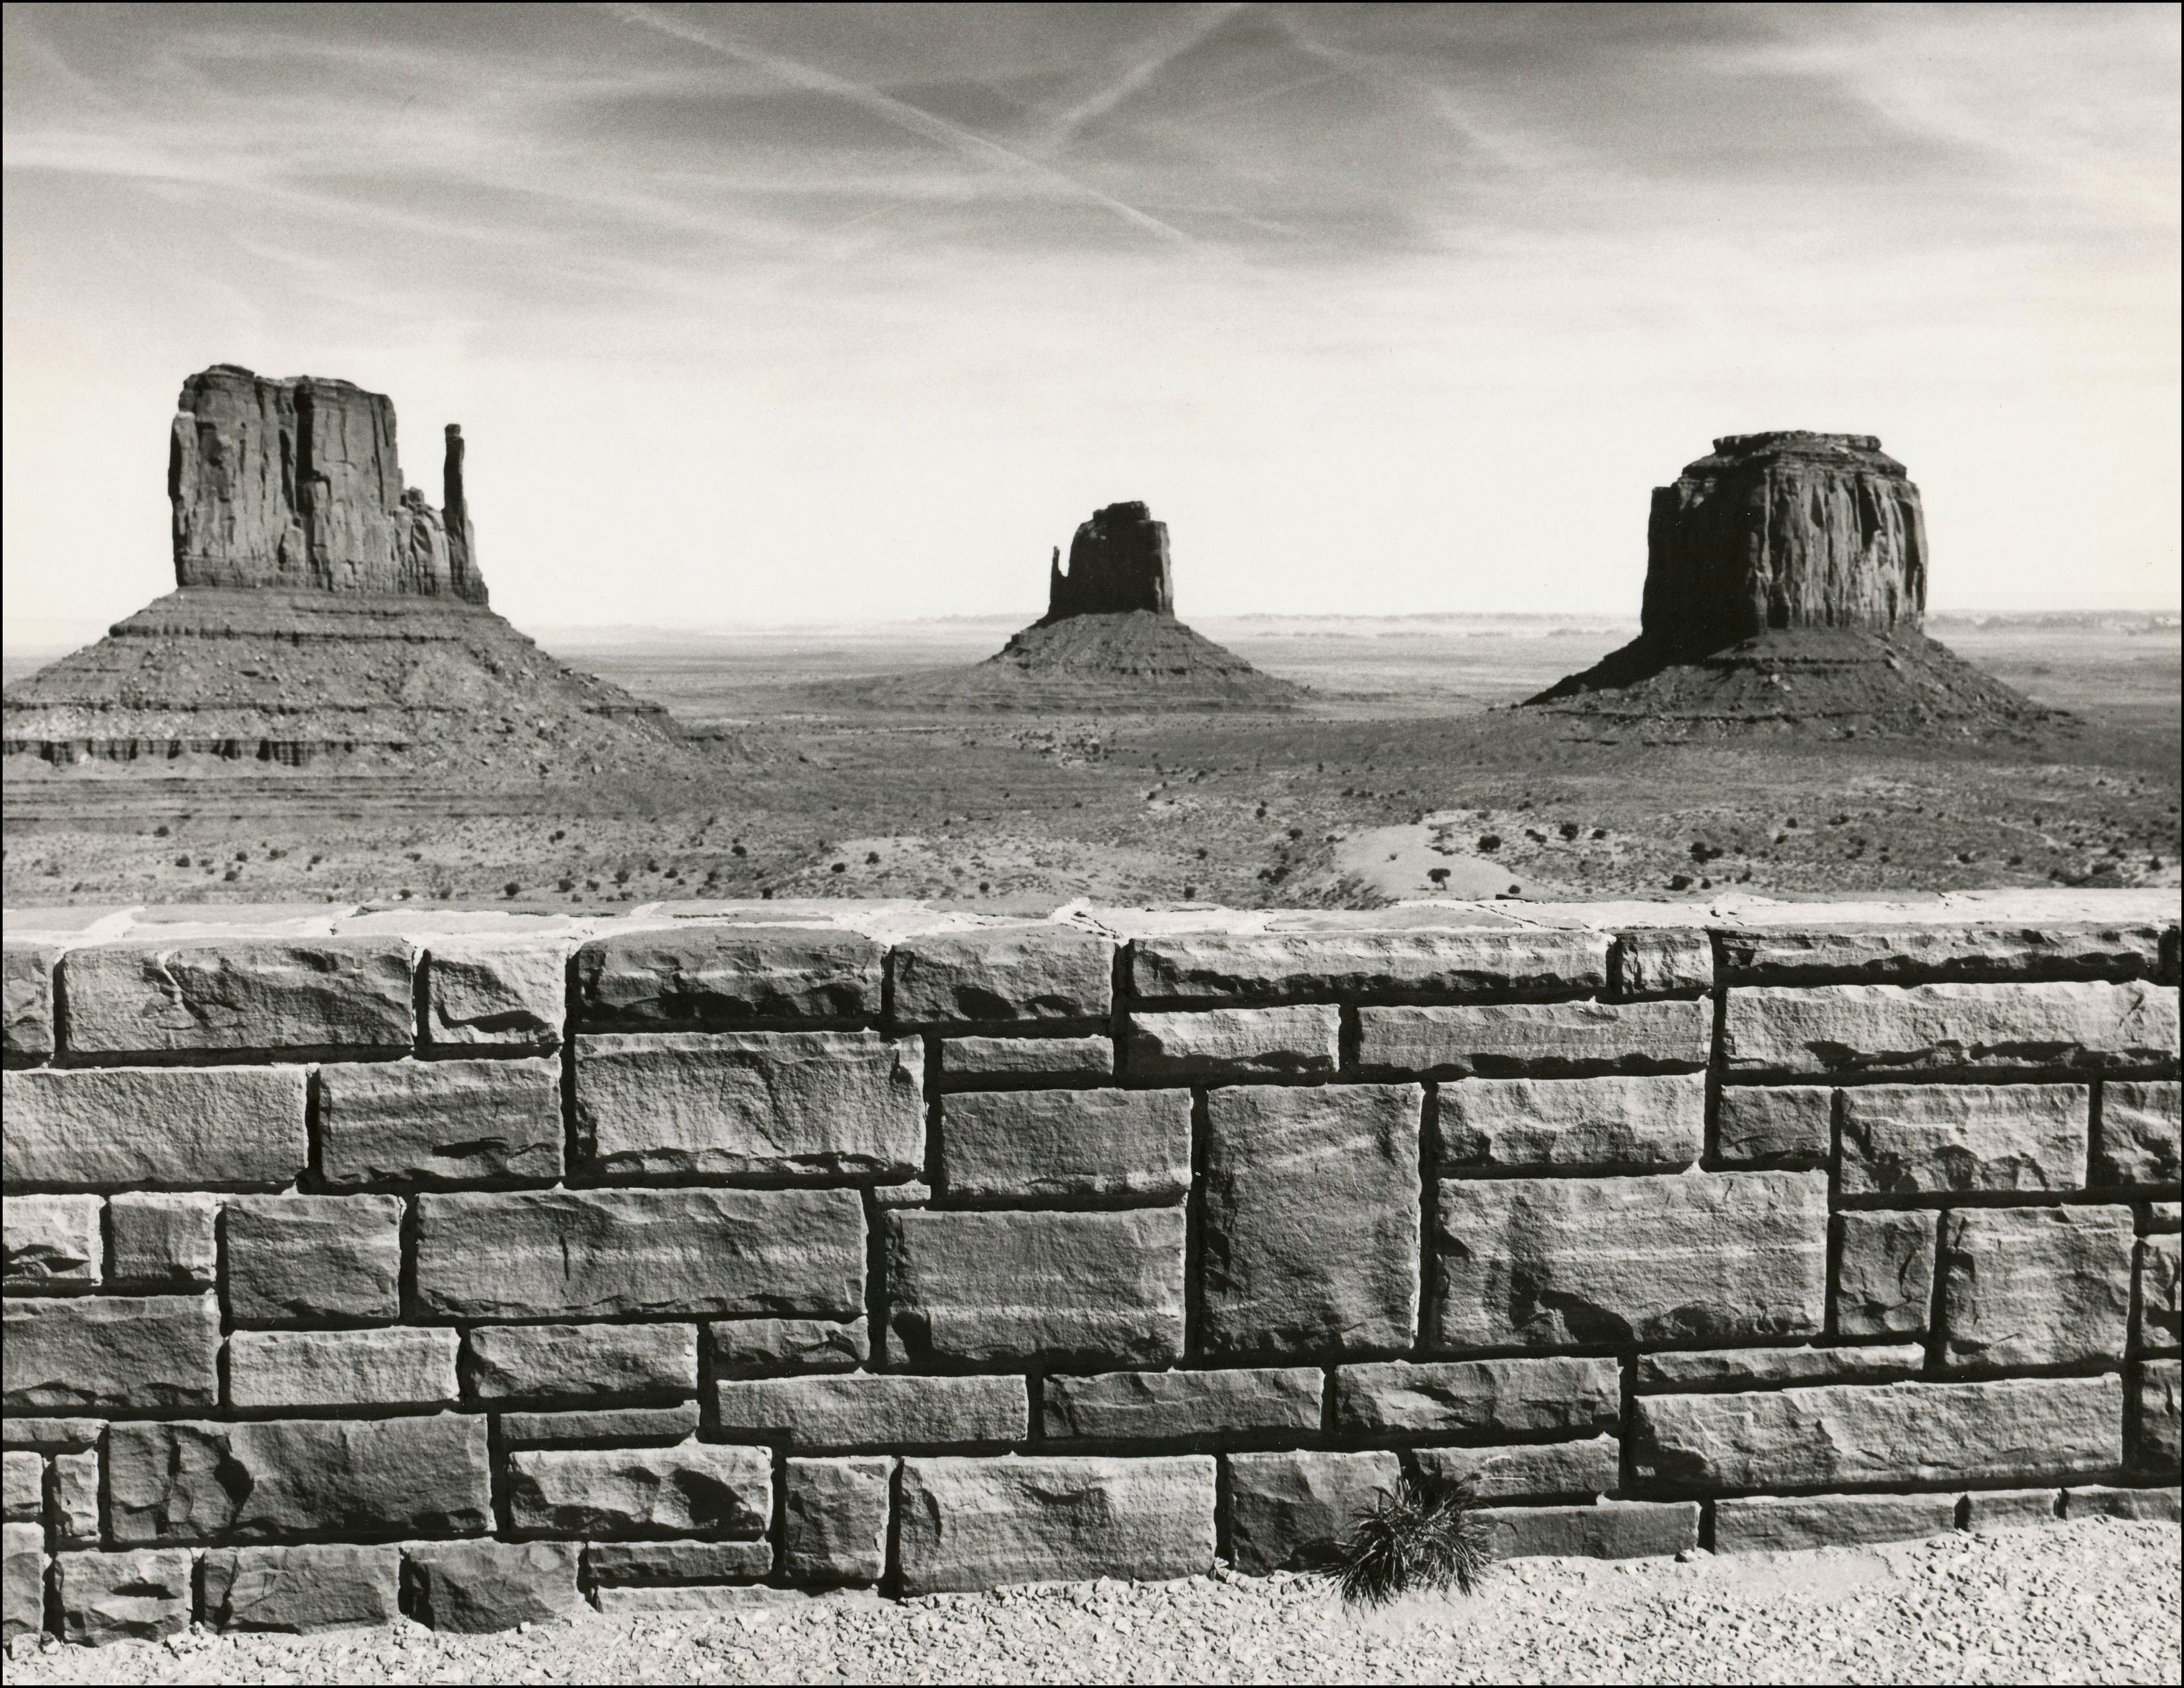 view of the mittens in monument valley with stone fence in foreground